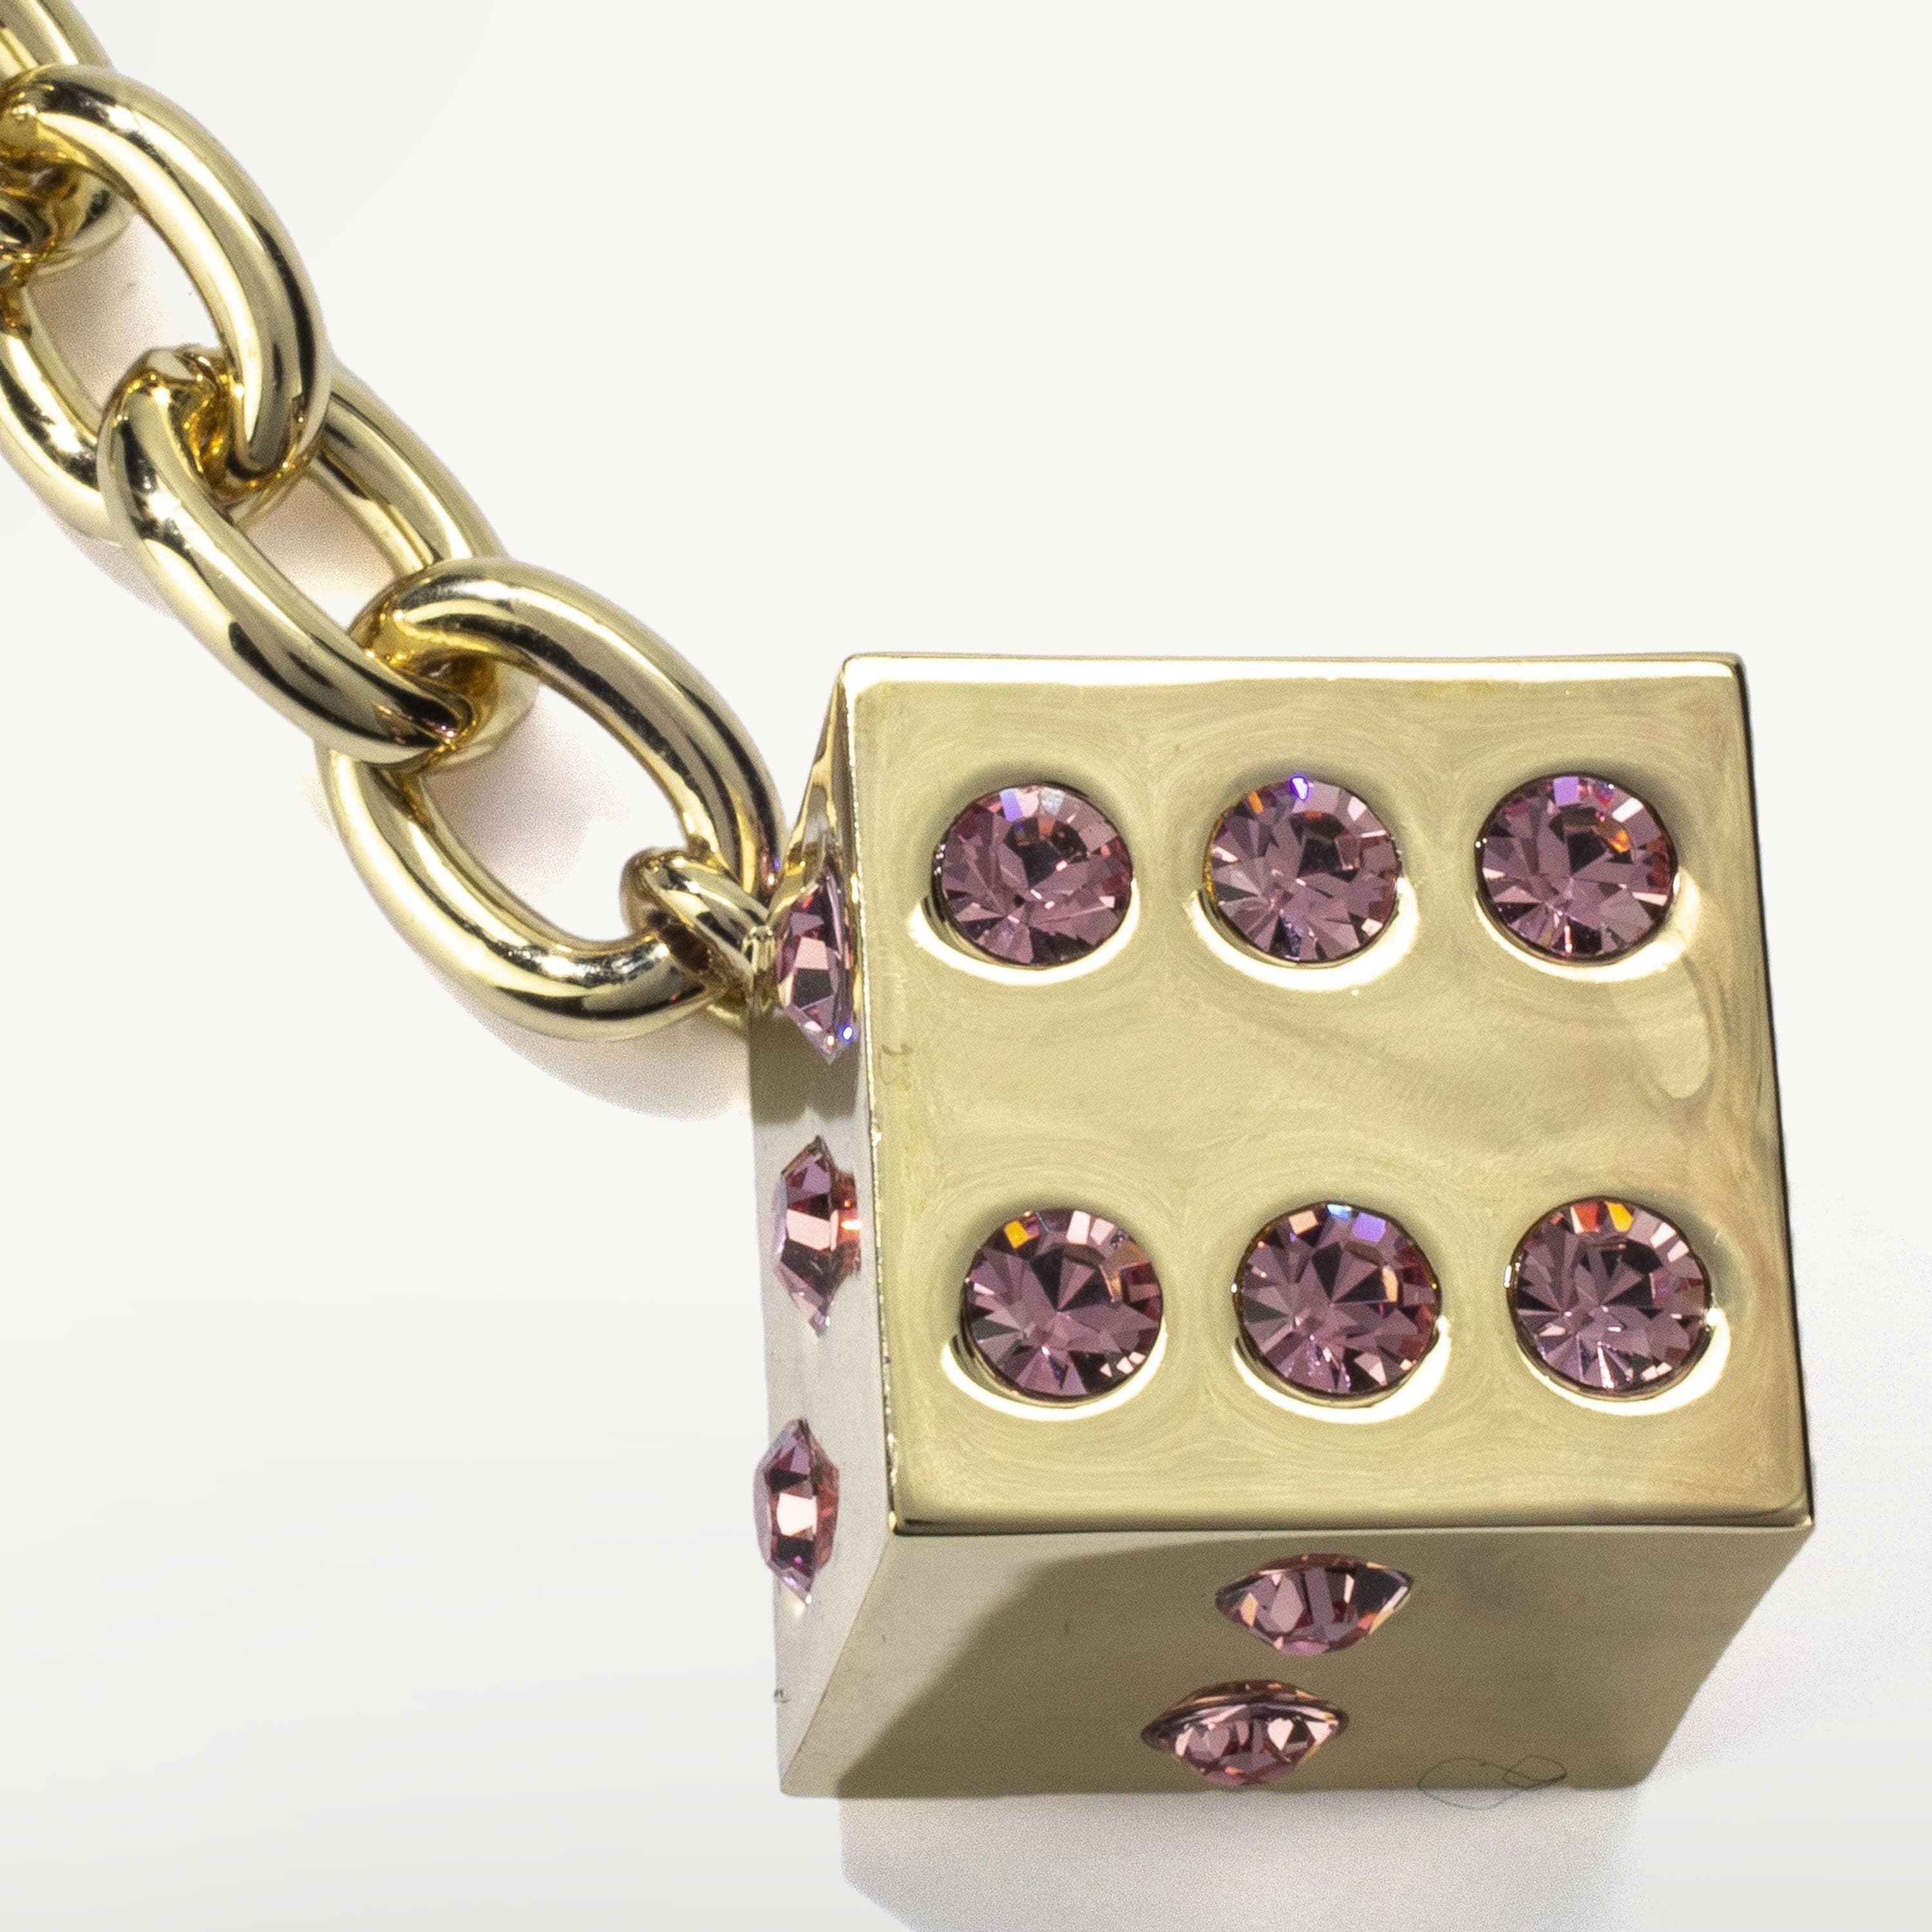 Kalifano Crystal Keychains Pink Dice with Gold Keychain made with Swarovski Crystals SKC-132